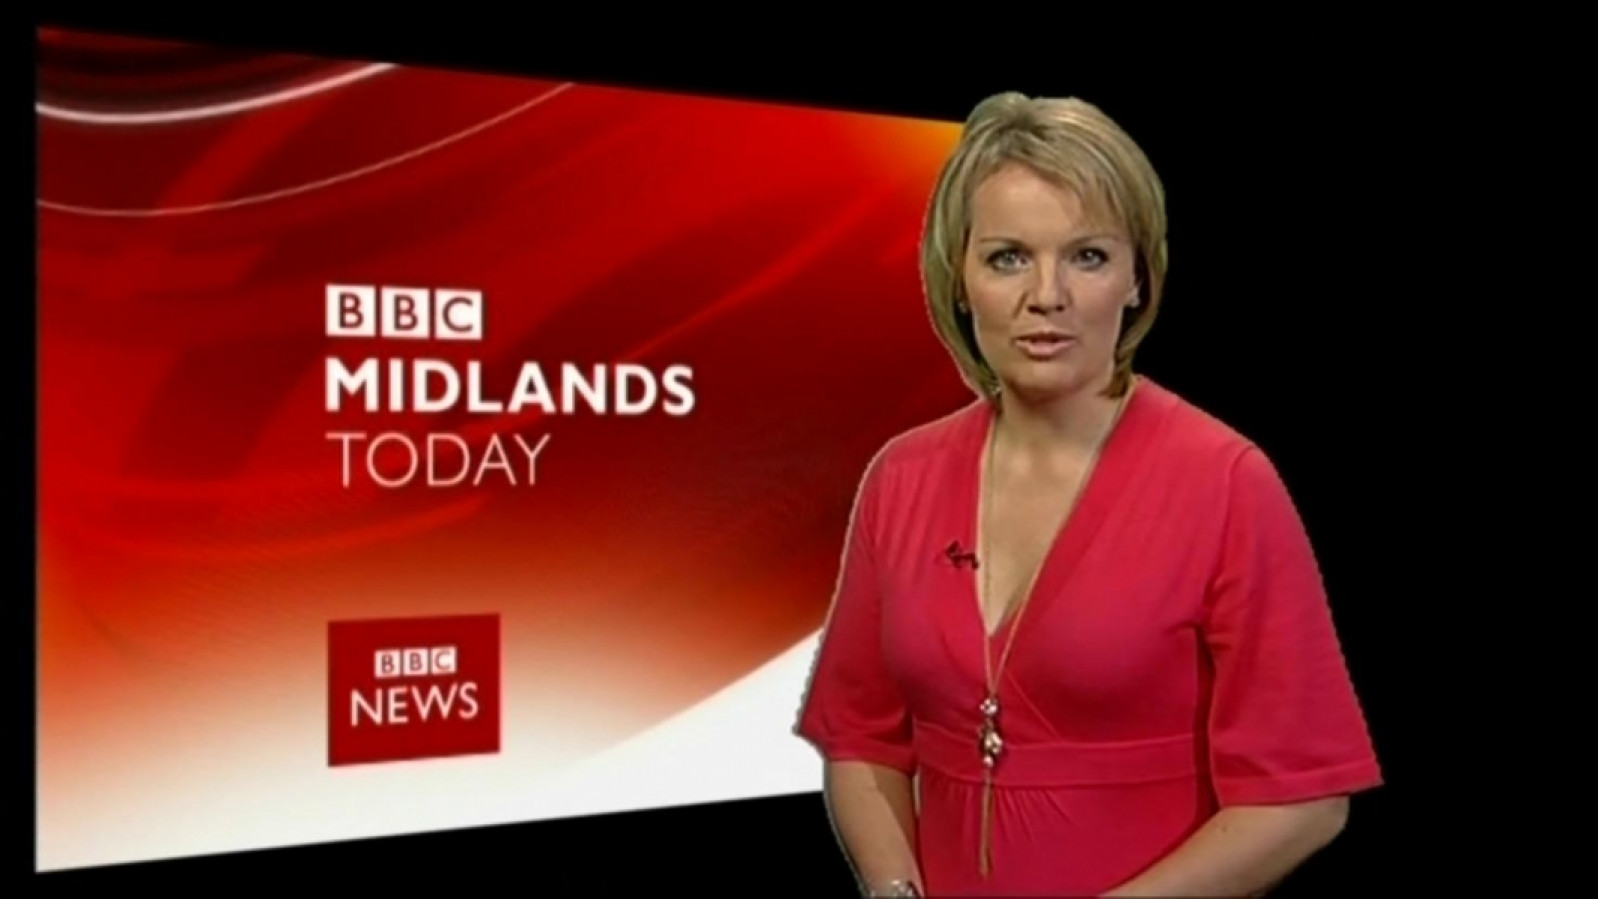 MIM member features on Midlands Today